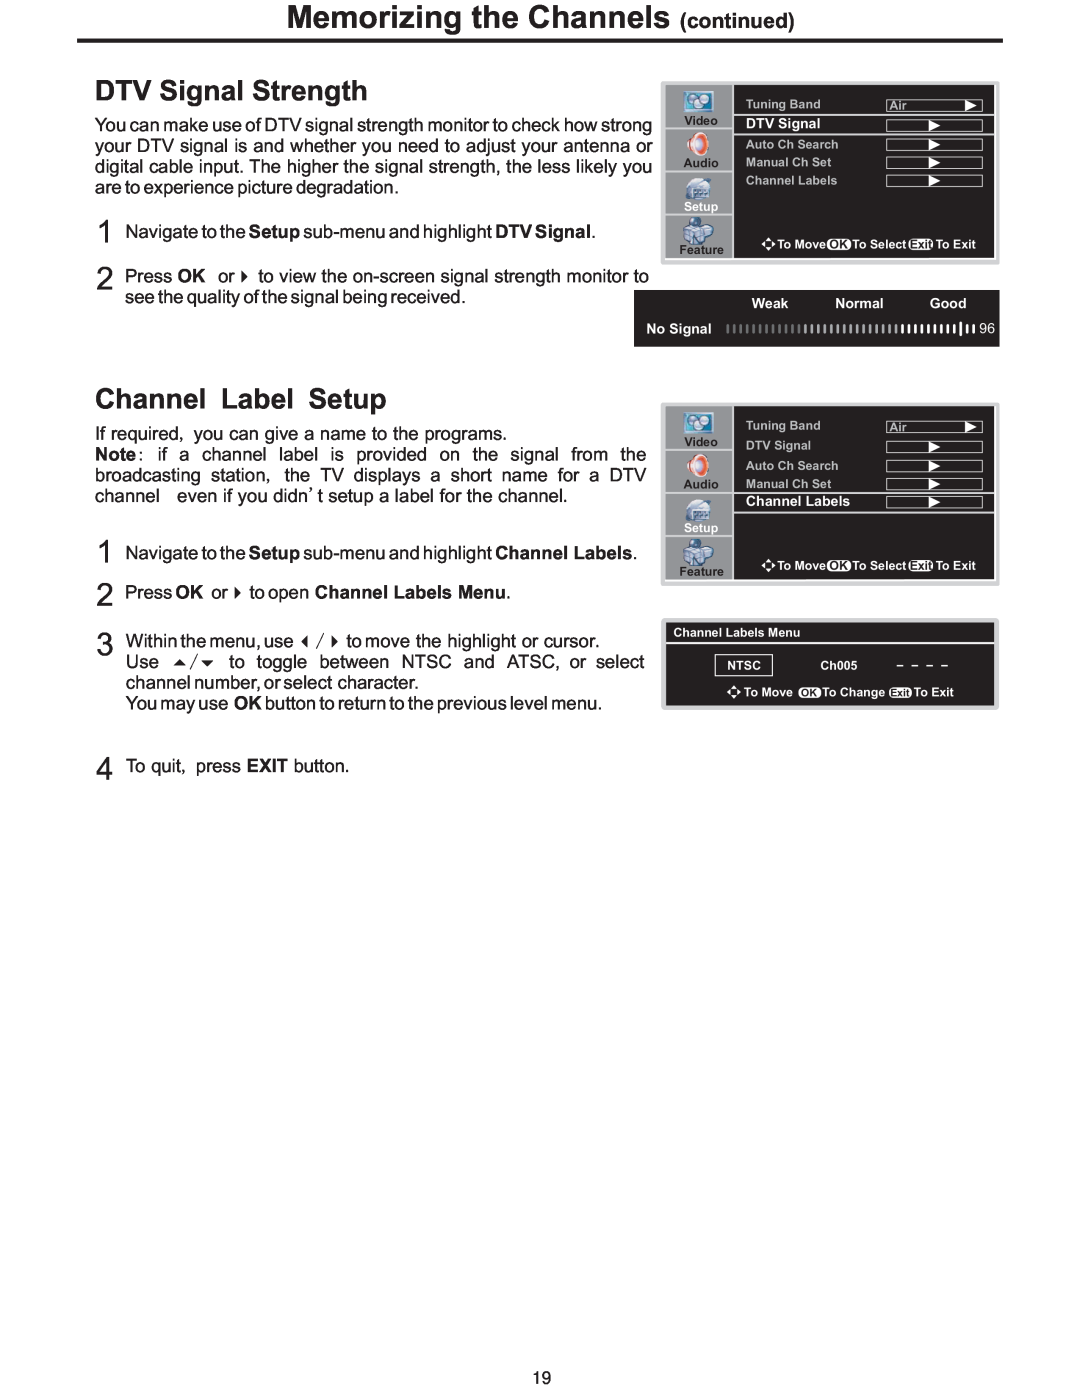 Polaroid PLA-4248 manual Memorizing the Channels continued, DTV Signal Strength, Channel Label Setup 